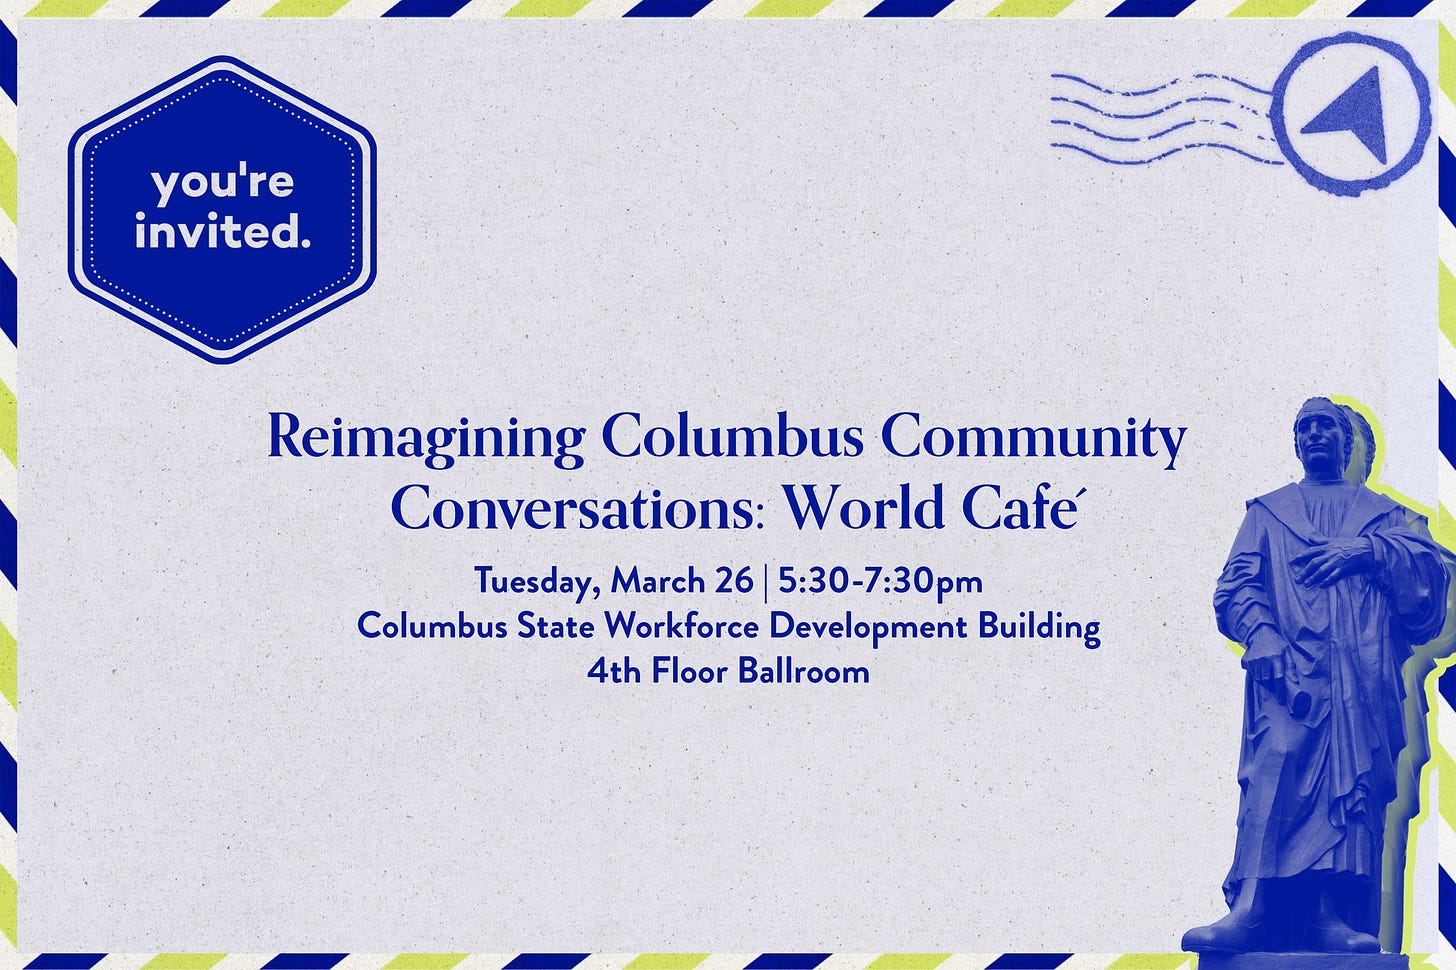 May be a graphic of text that says 'you're invited. Reimagining Columbus Community Conversations: World Café Tuesday, March 26 5:30-7:30pm Columbus State Workforce Development Building 4th Floor Ballroom'